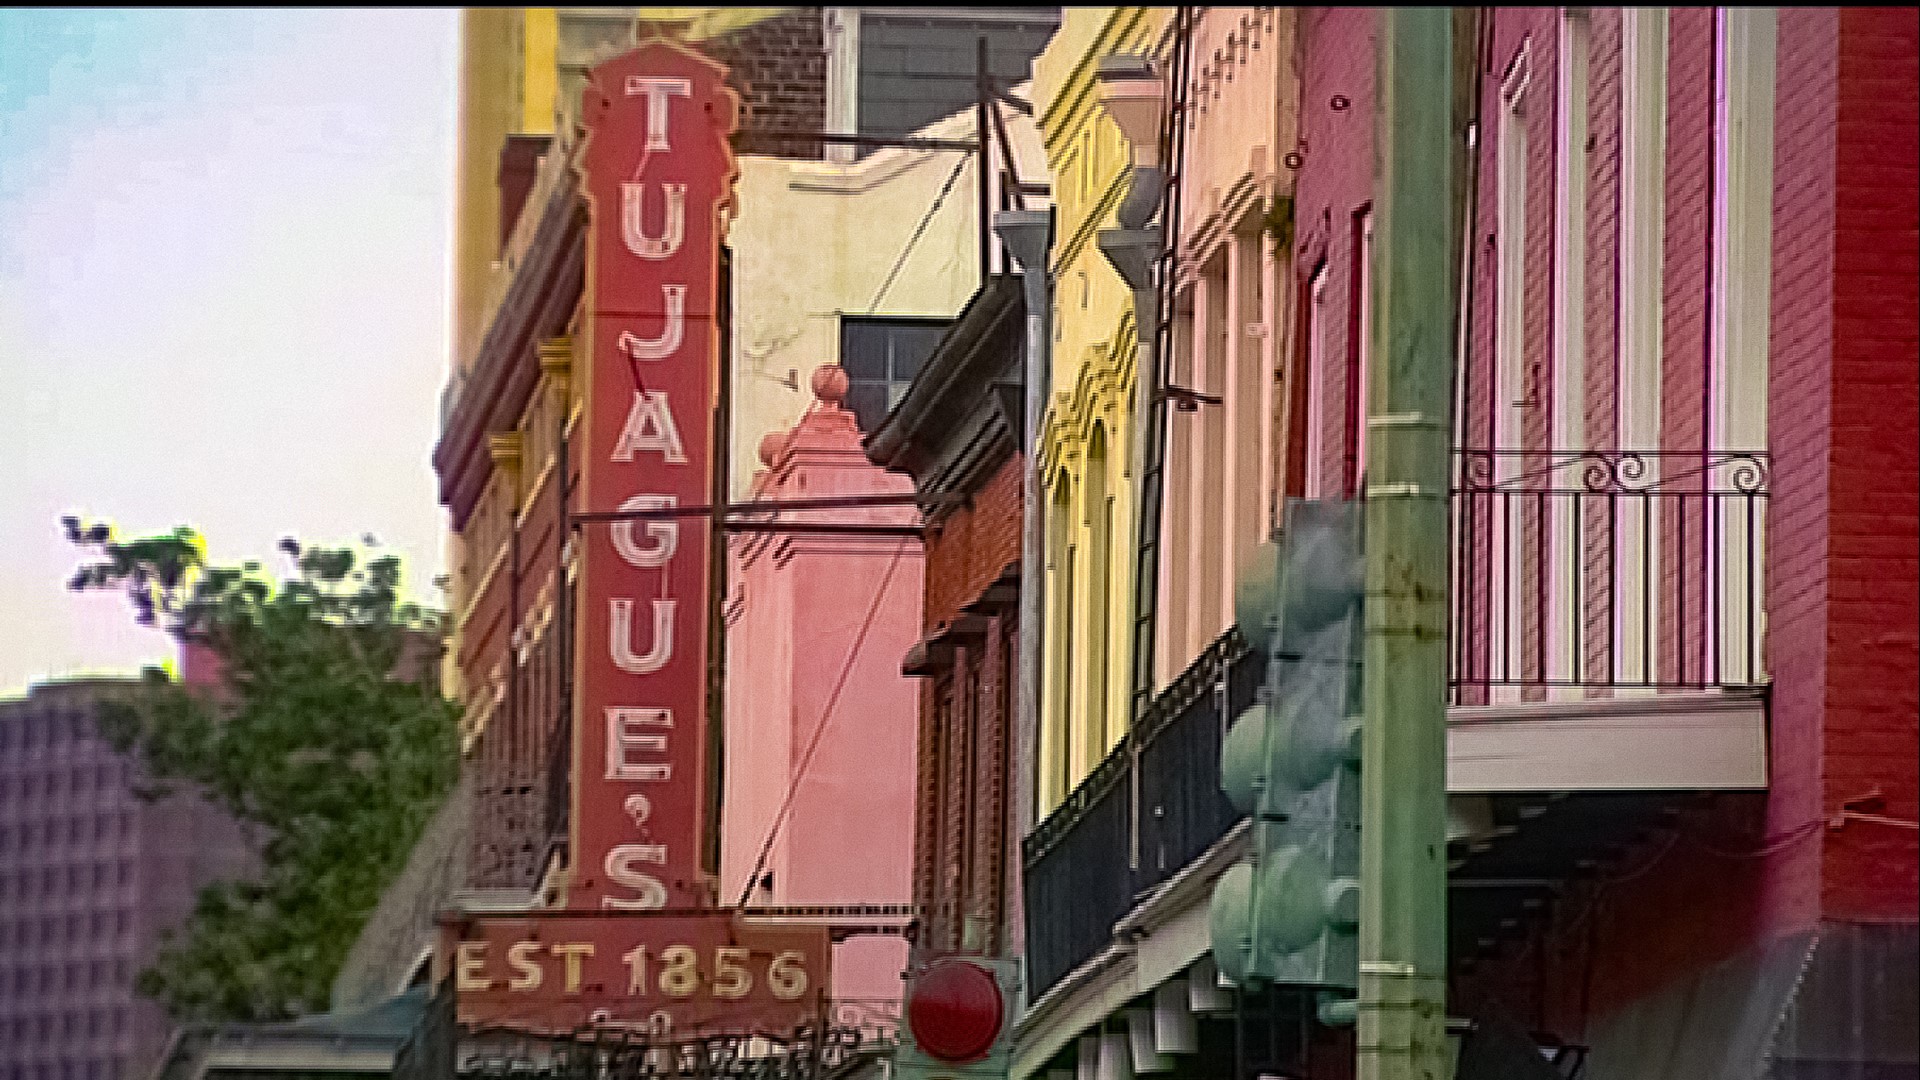 Tujague's owner Mark Latter told The Times-Picayune | New Orleans Advocate that the move was an economic necessity.